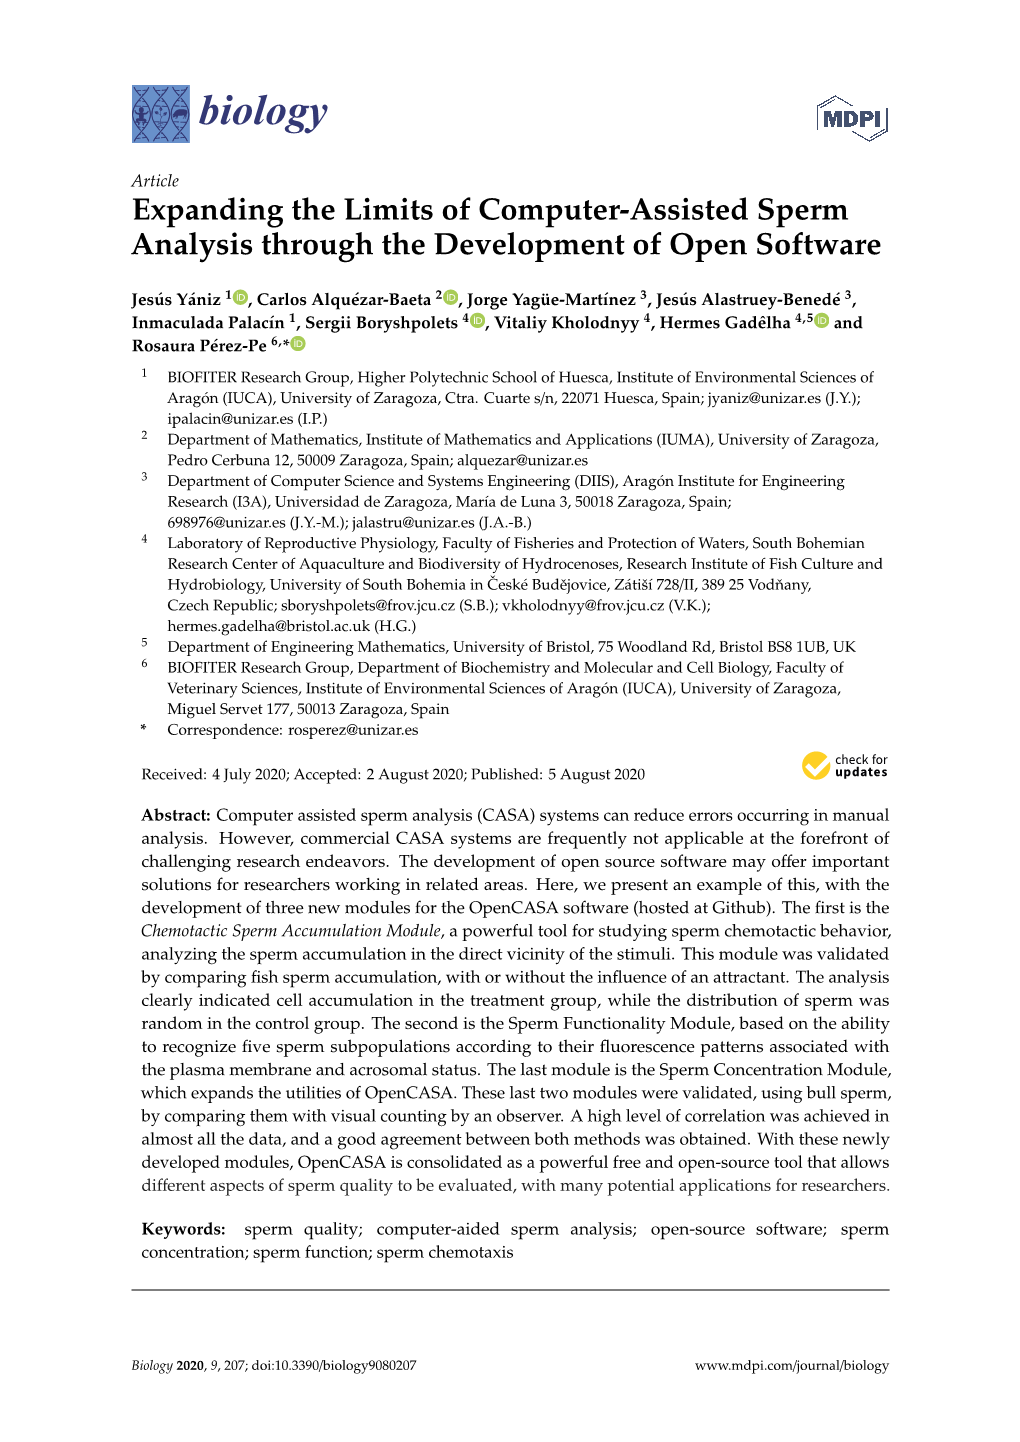 Expanding the Limits of Computer-Assisted Sperm Analysis Through the Development of Open Software